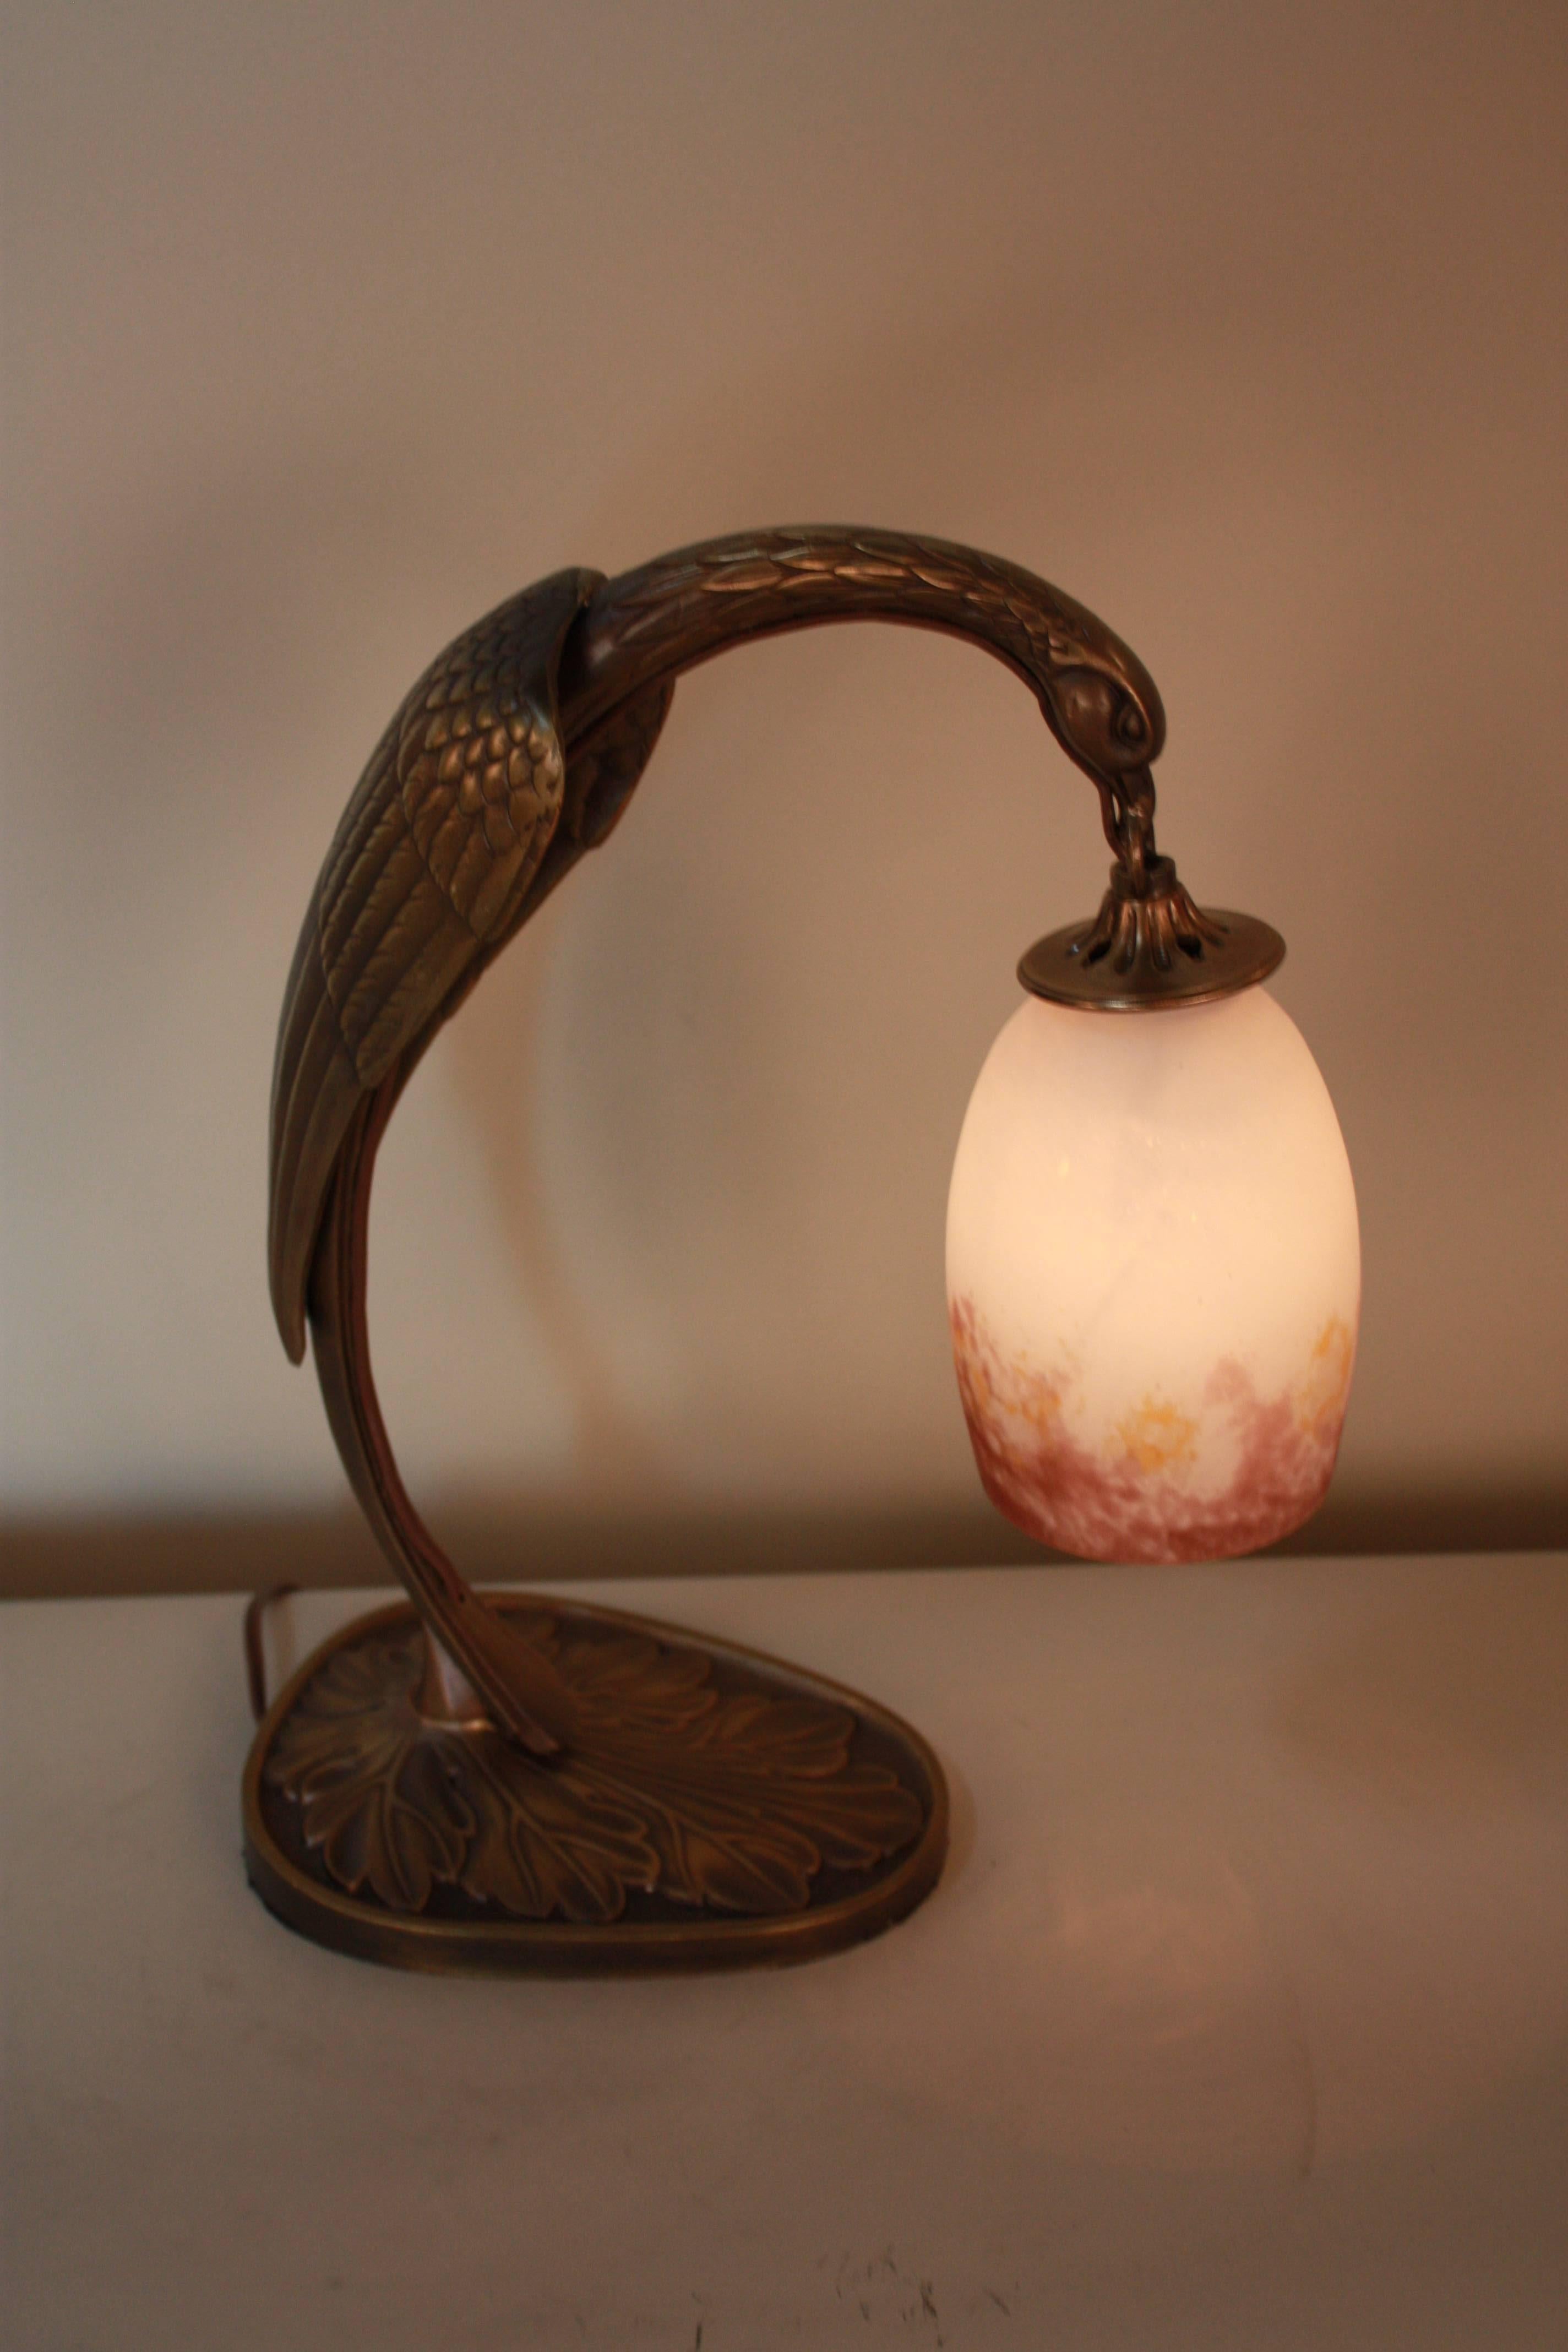 A fantastic bronze table lamp. Resembling the legendary phoenix, this lamp feature a stunning hand blow art glass shades.